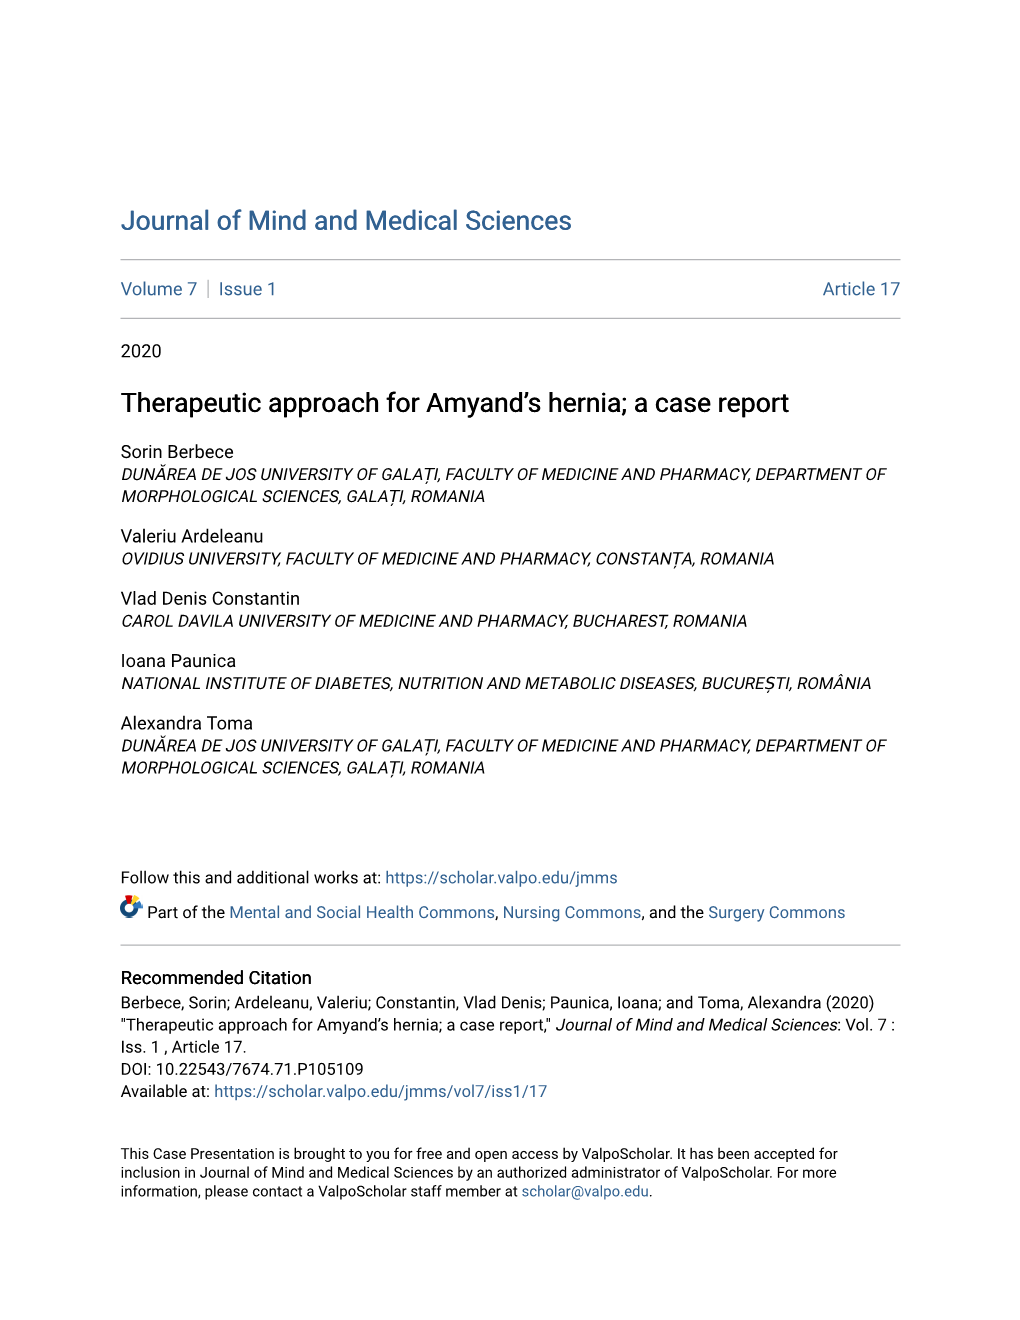 Therapeutic Approach for Amyand's Hernia; a Case Report